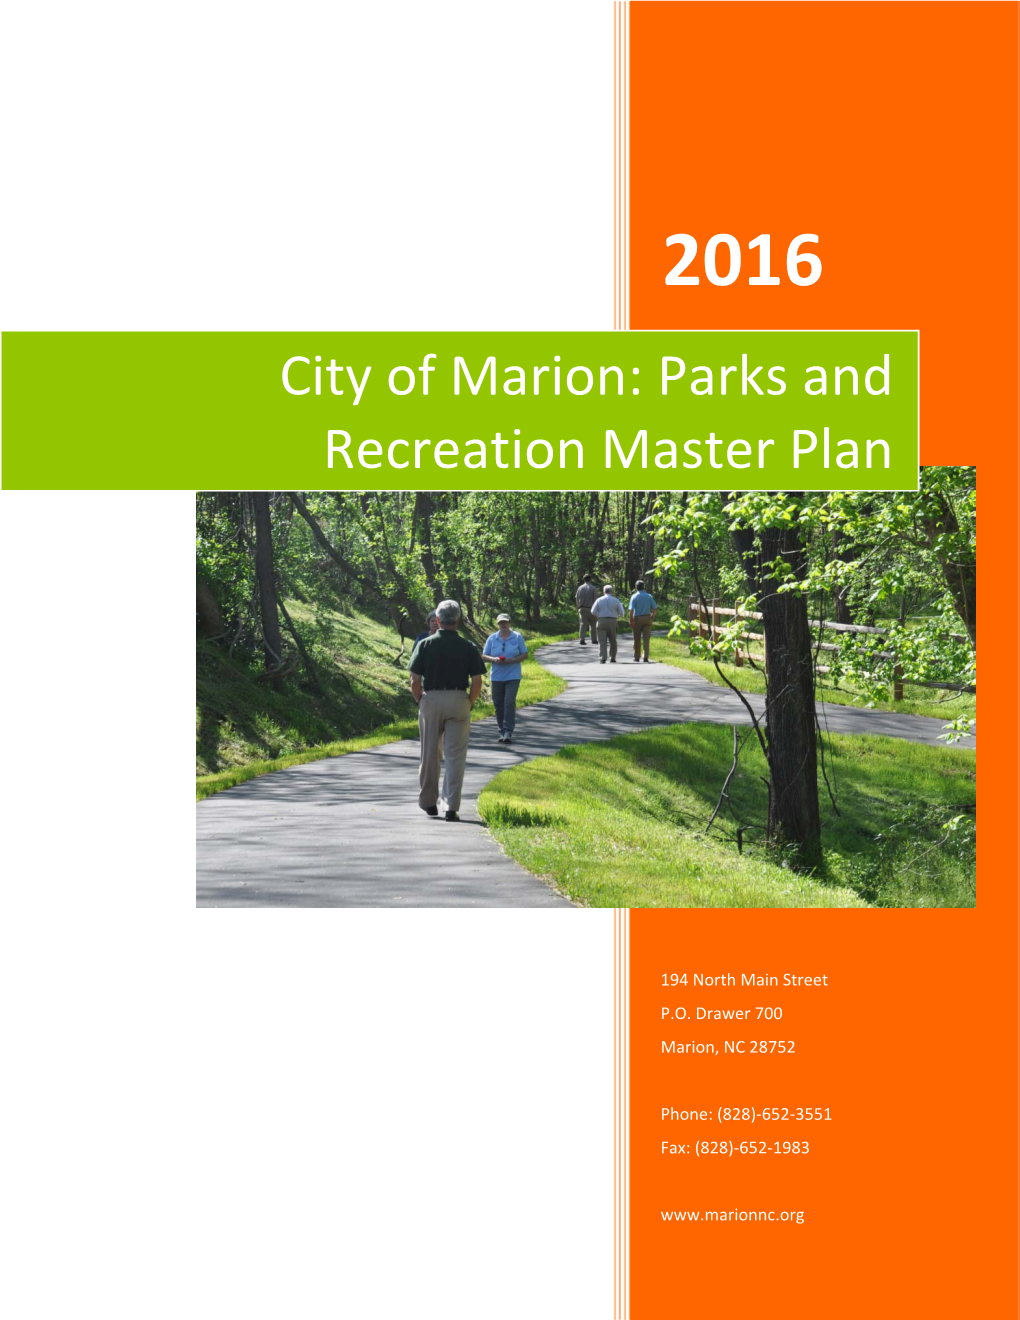 Parks and Recreation Master Plan